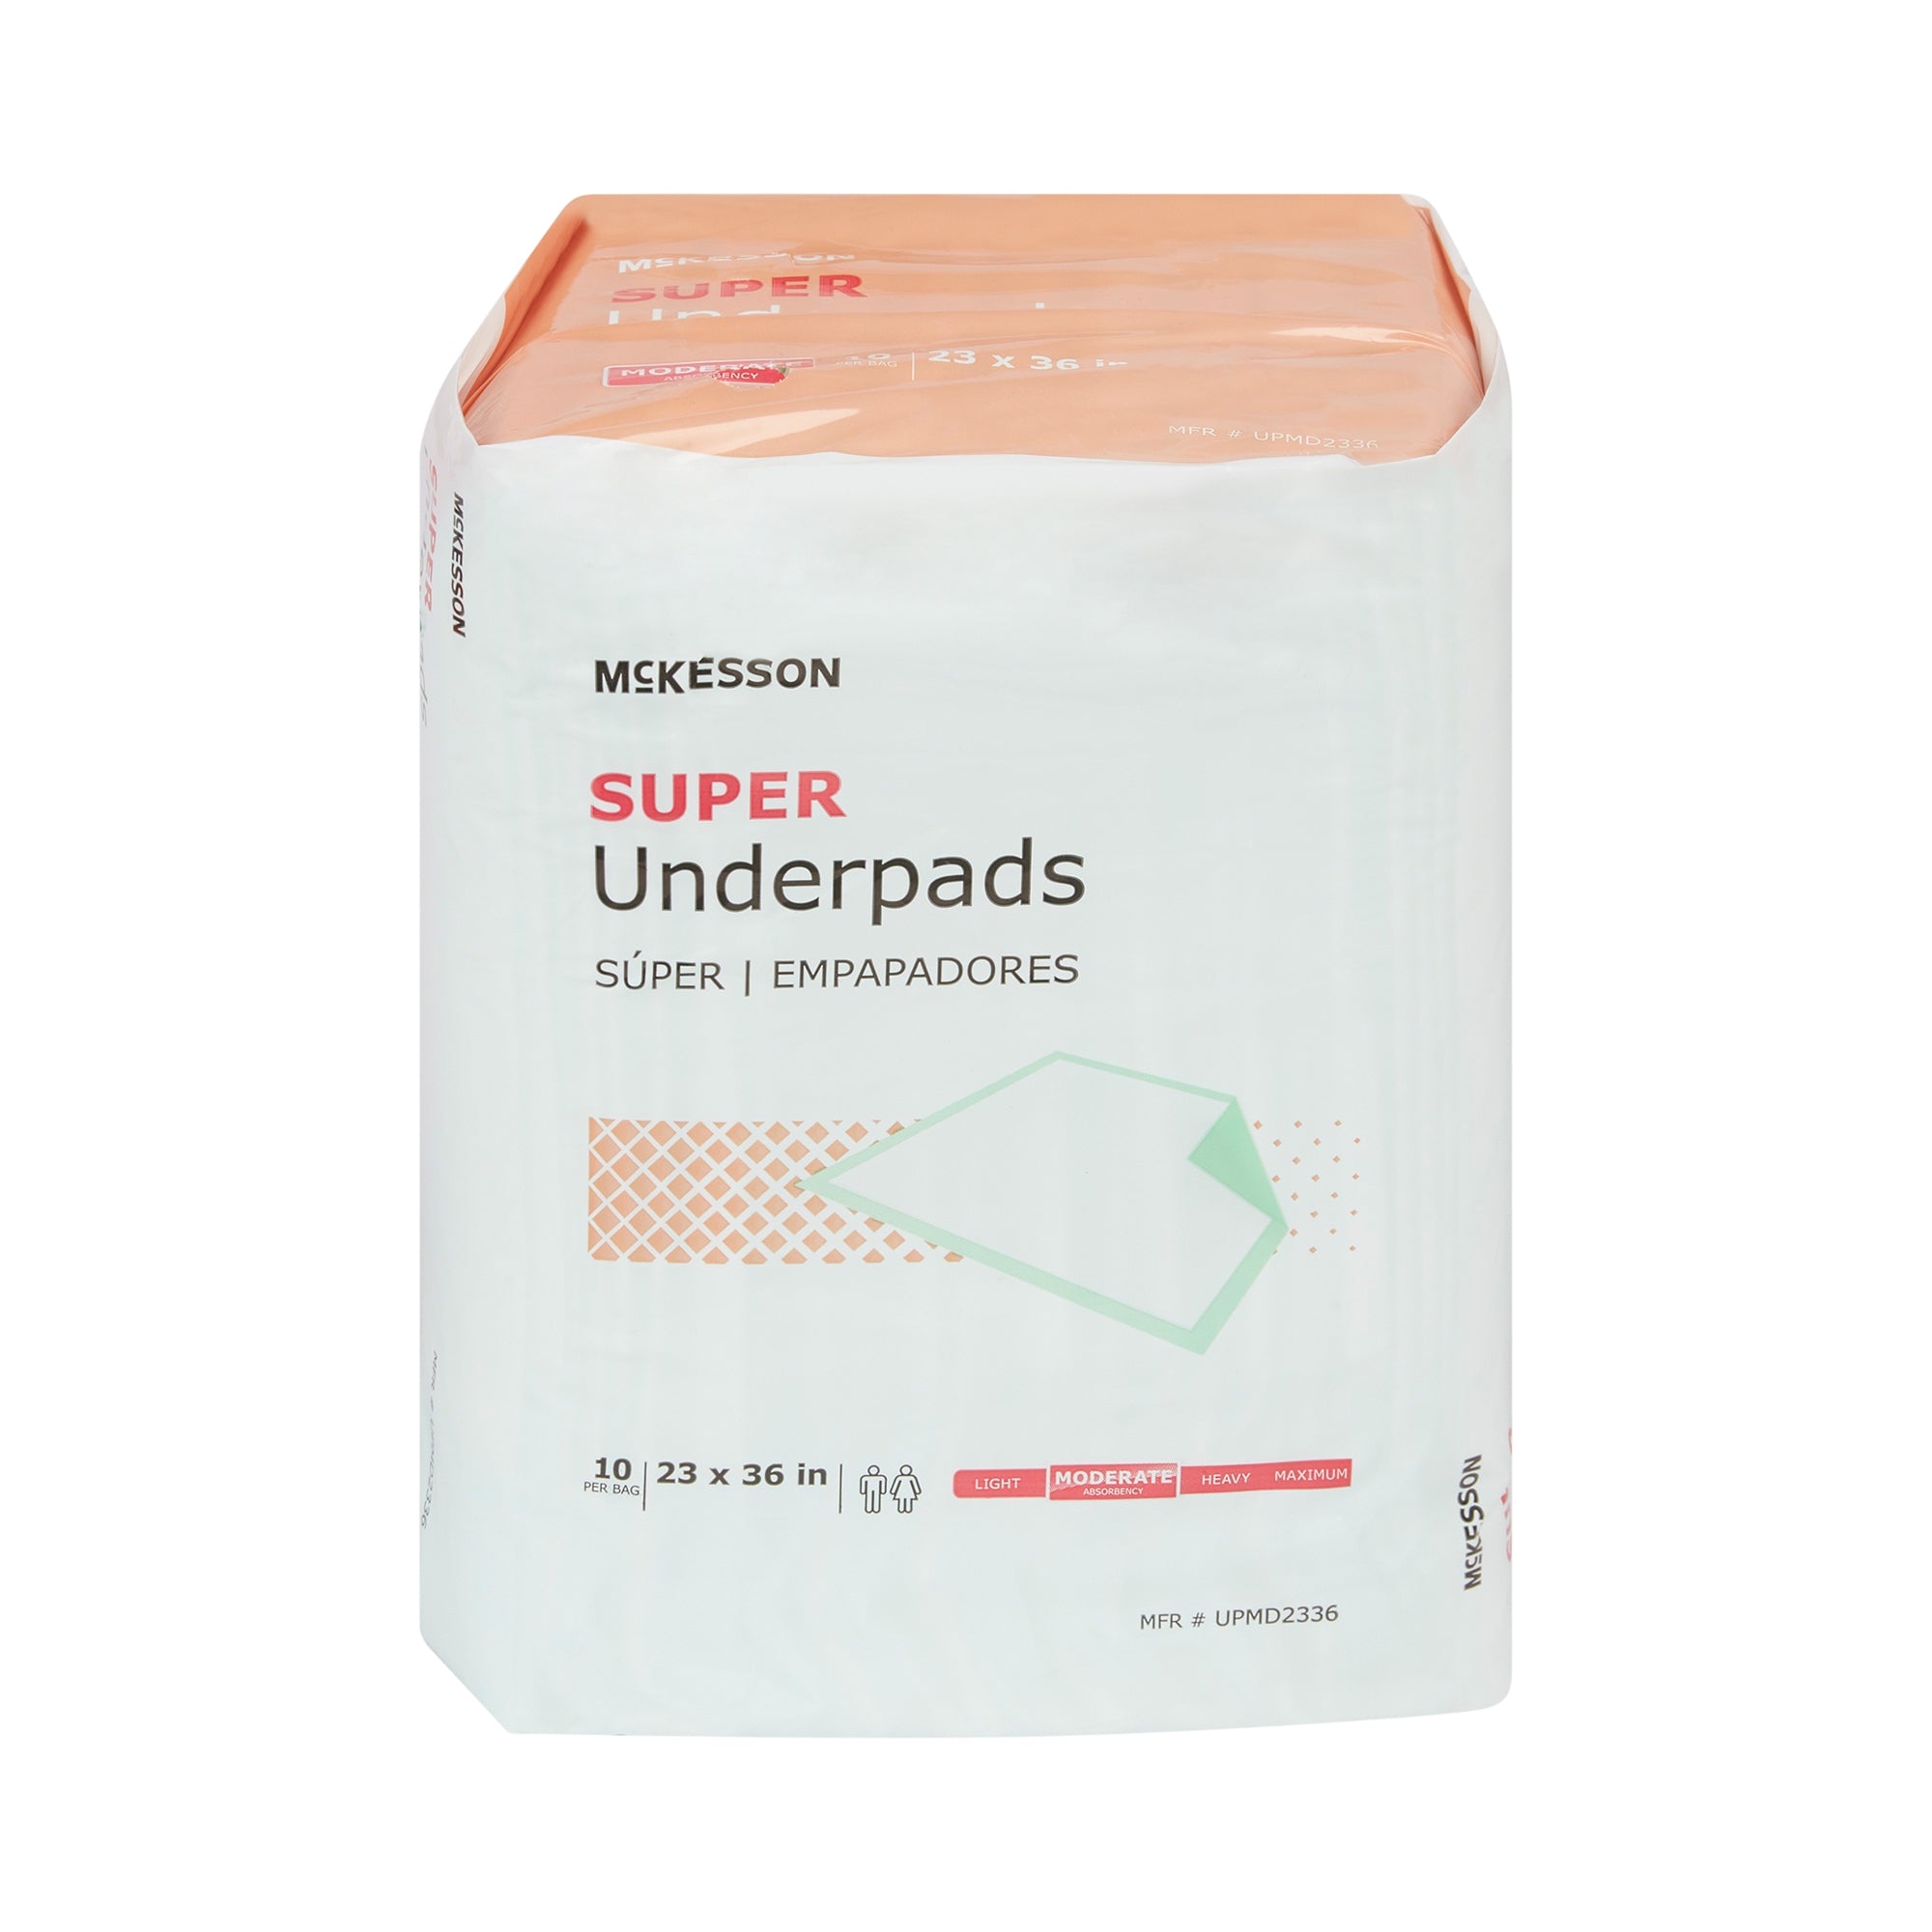 McKesson Super Absorbent Underpads 23x36, Moderate Absorbency - 10 Pack